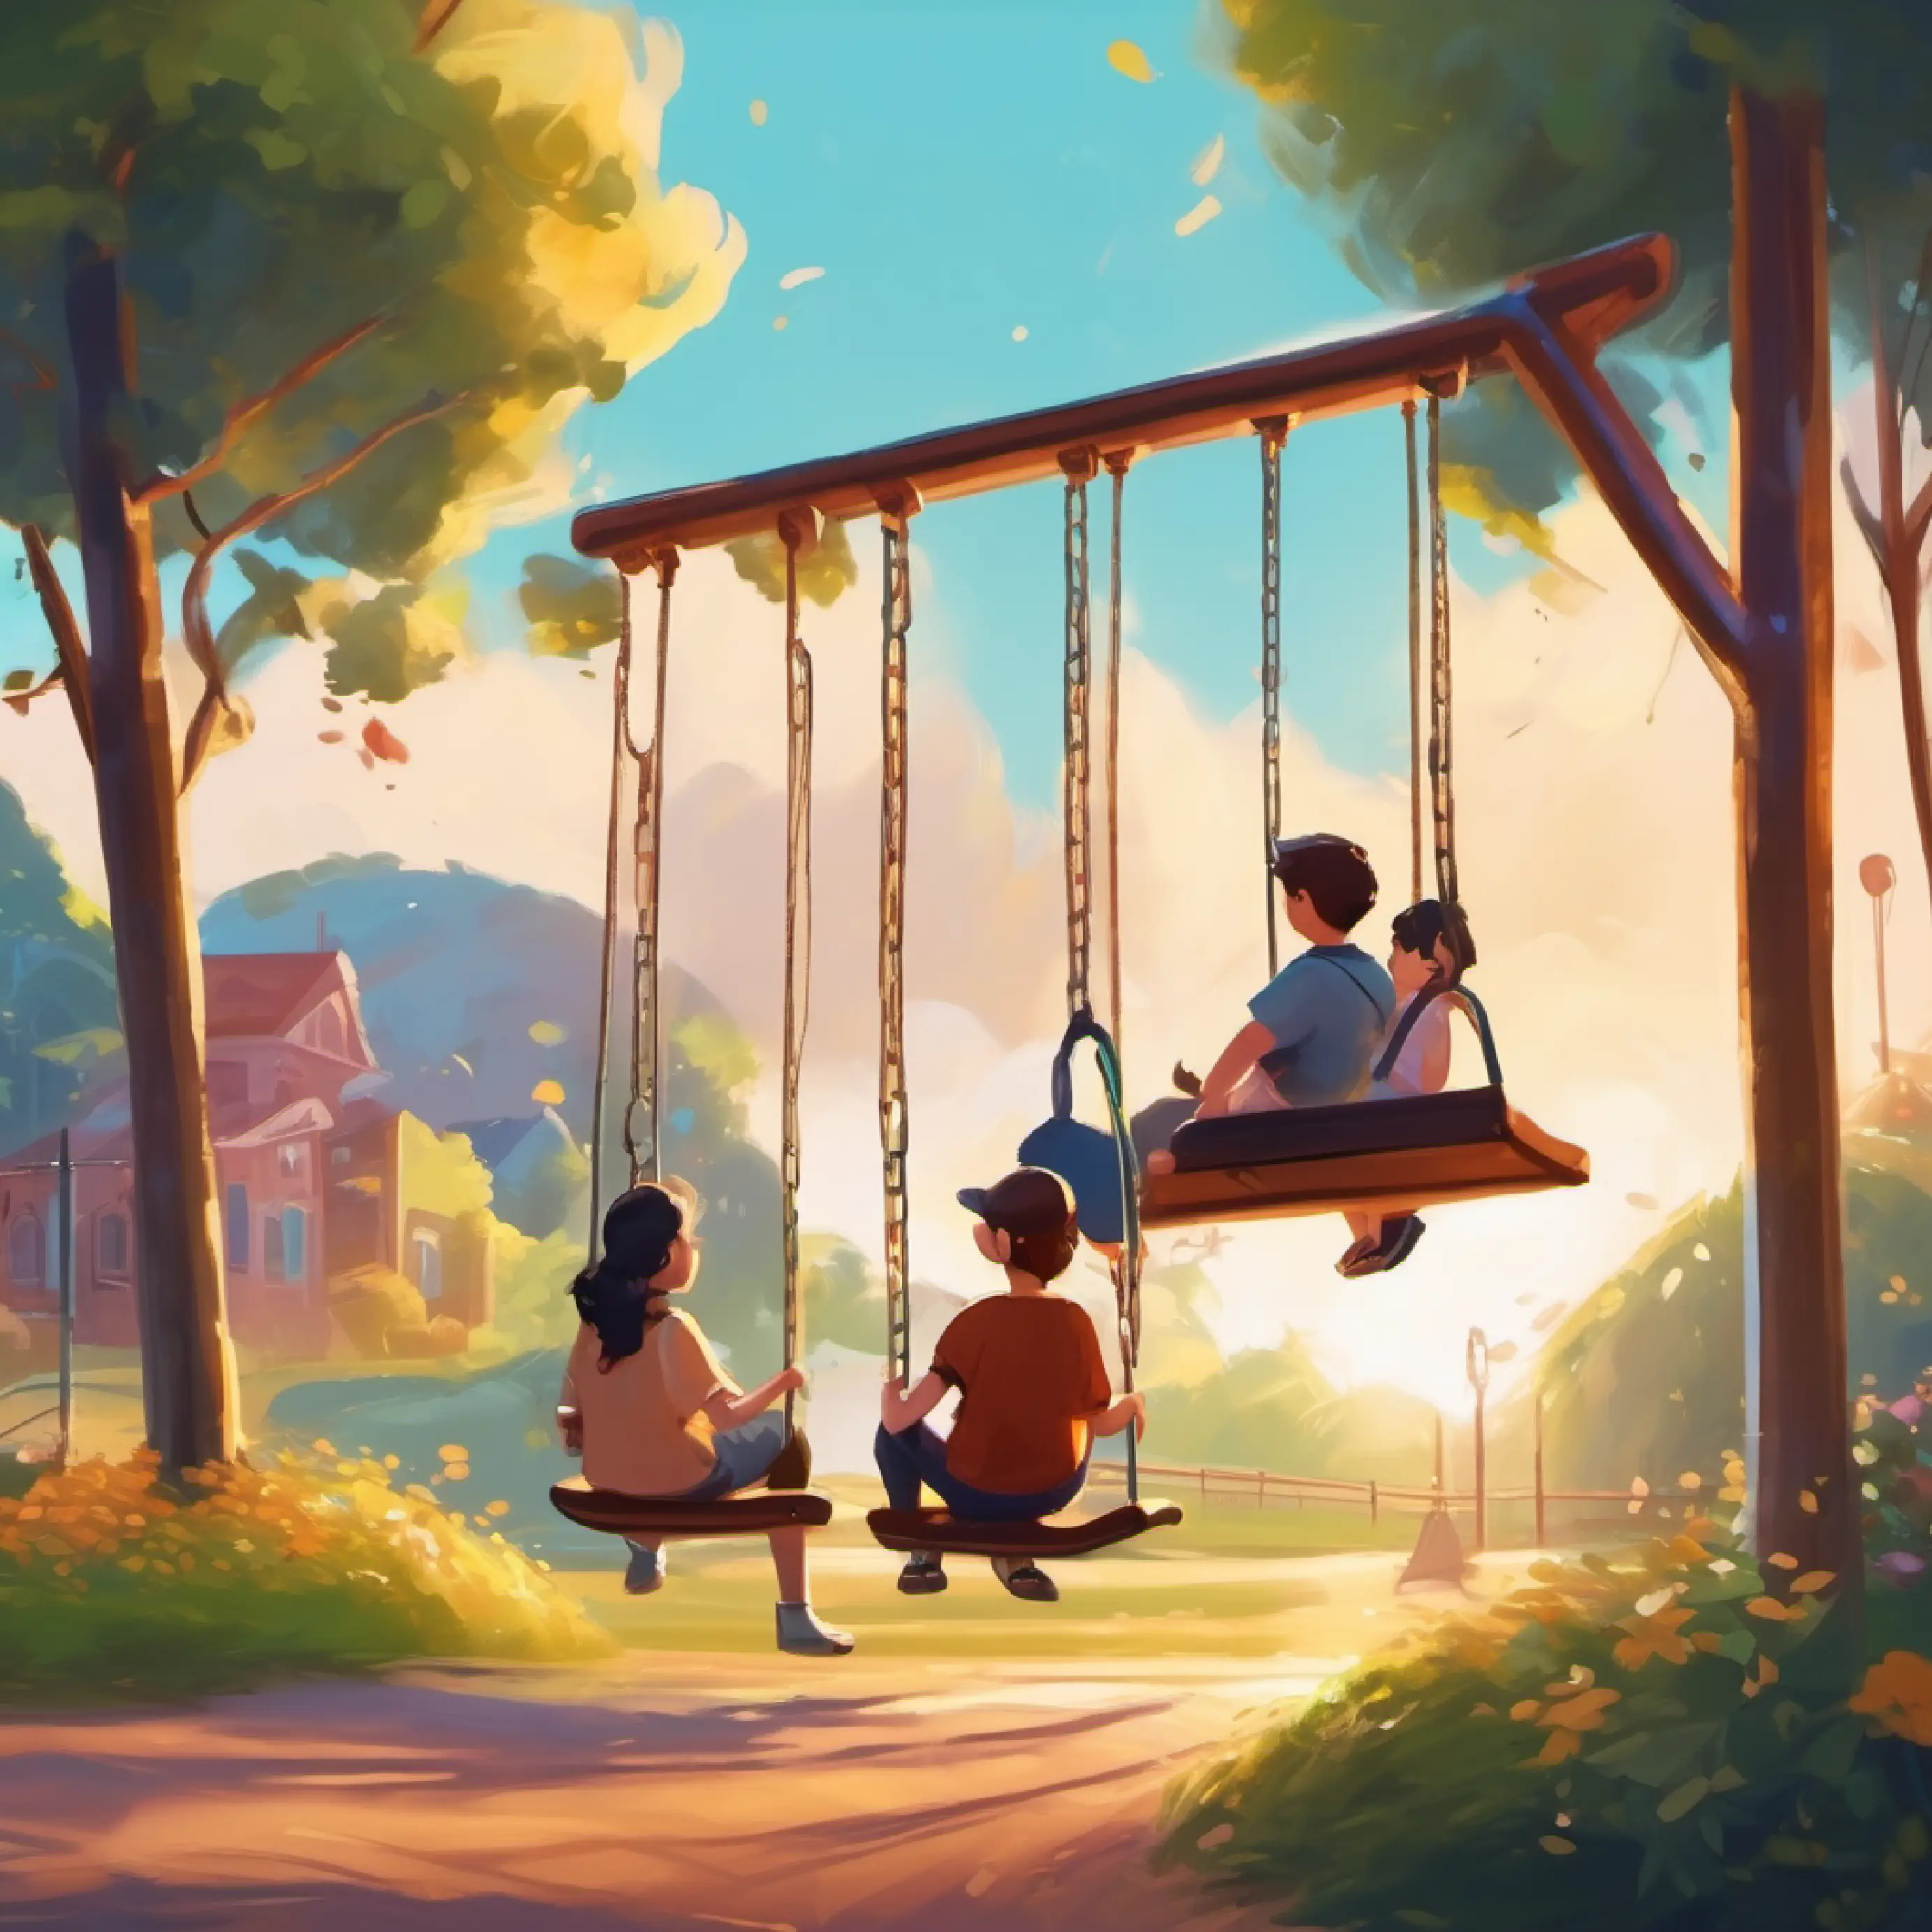 Friends on swings at the playground.